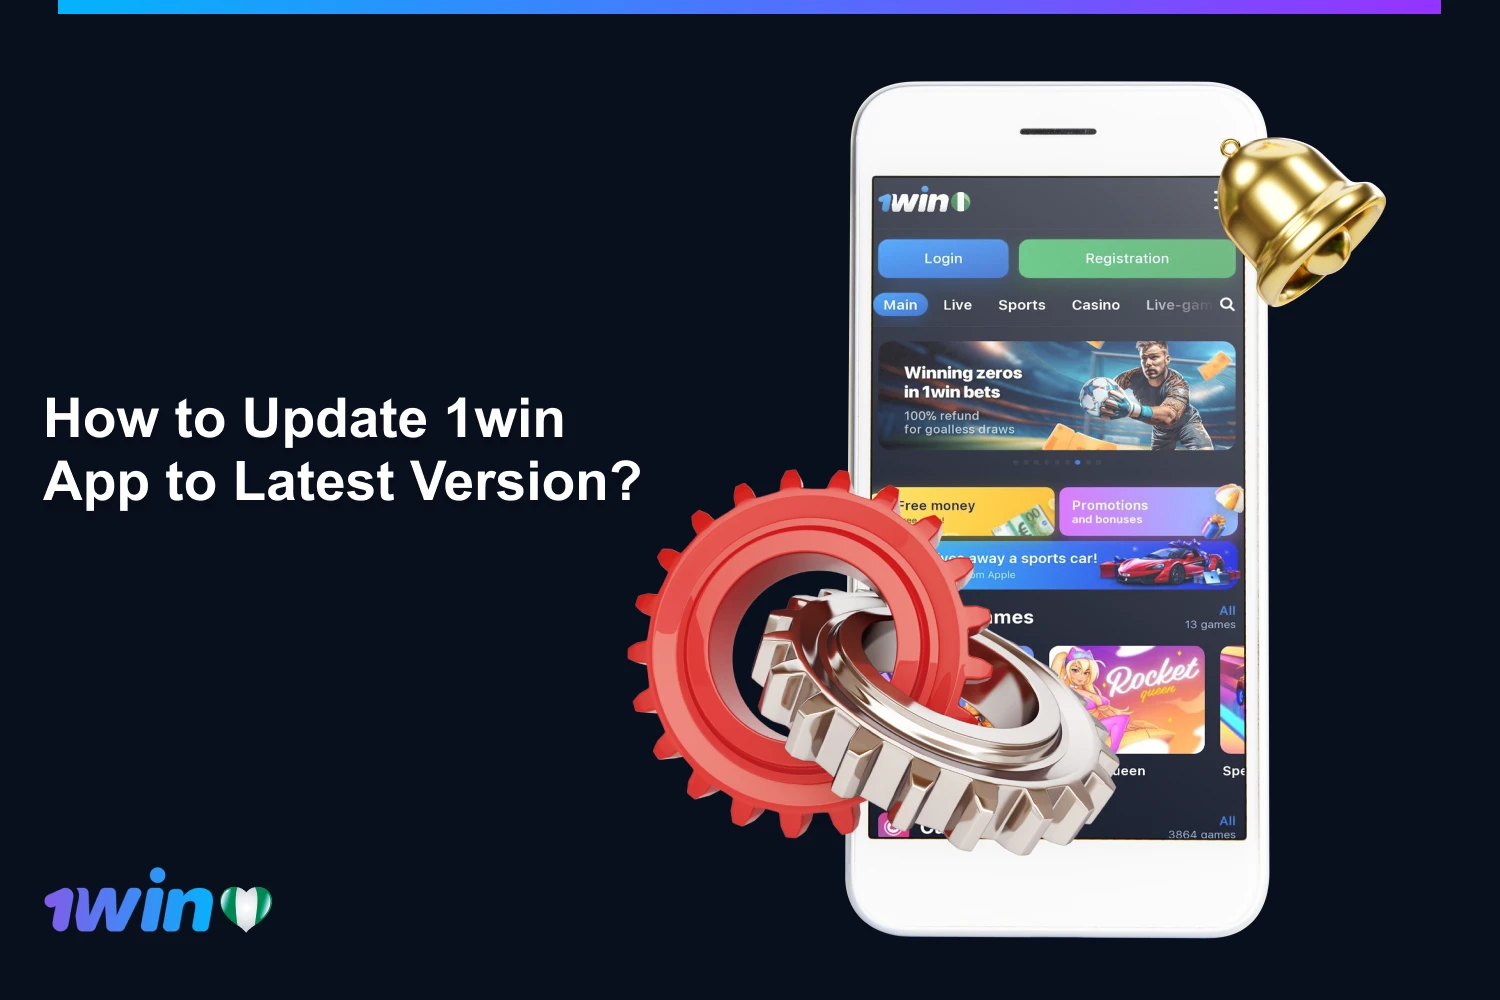 When the latest version notification appears, you are advised to install it on your device to enjoy the improved and updated 1win Nigeria app